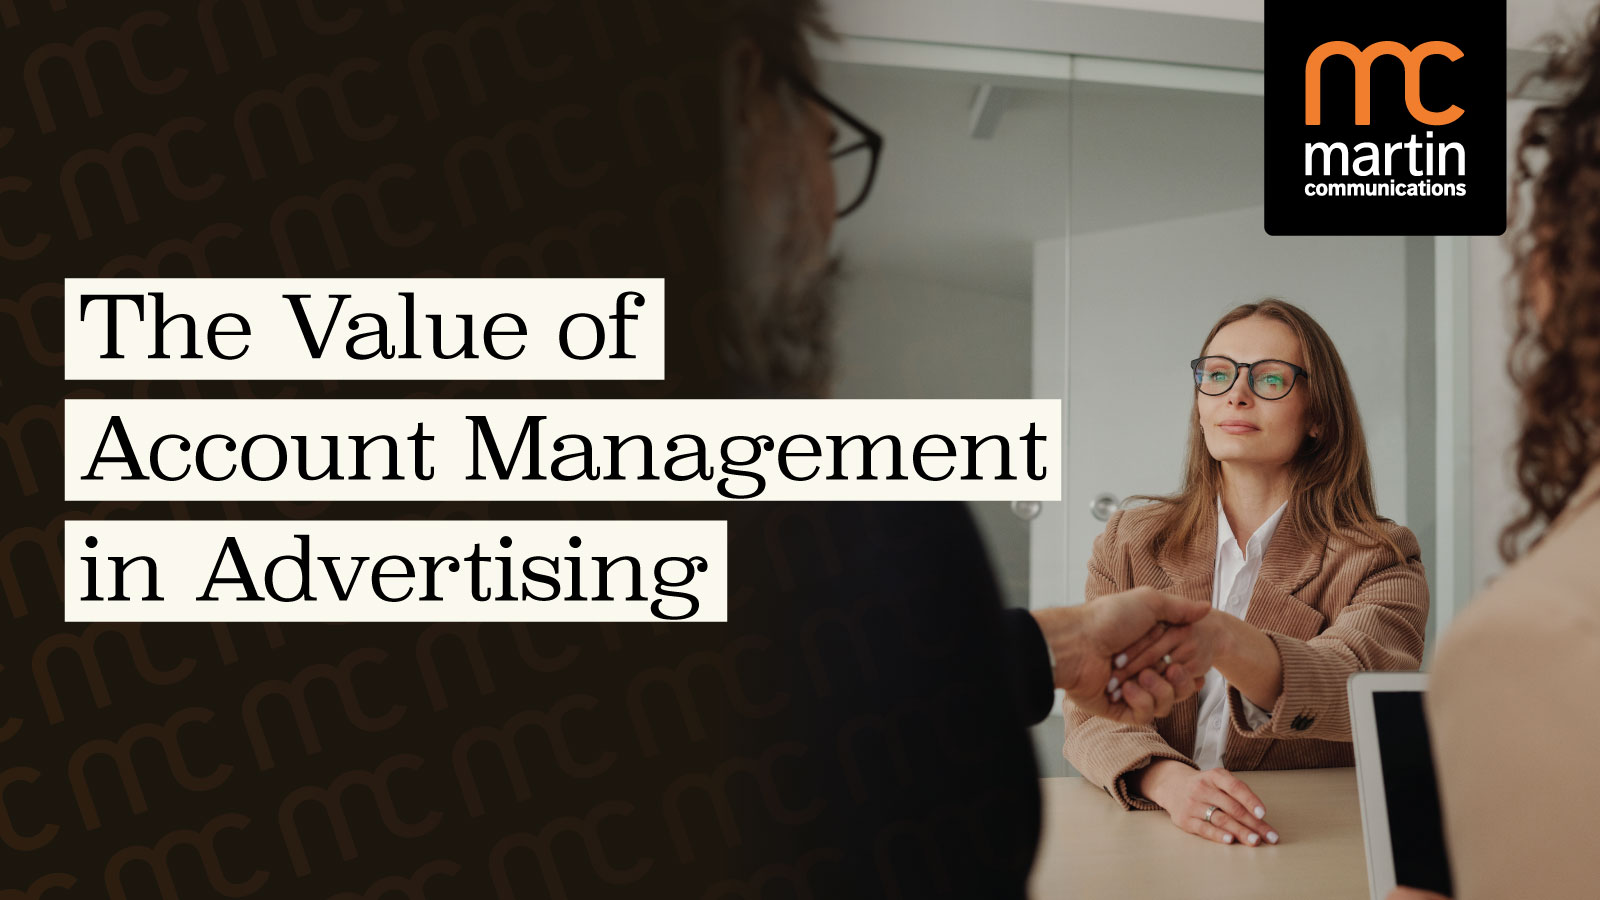 The Value of Account Management in Advertising